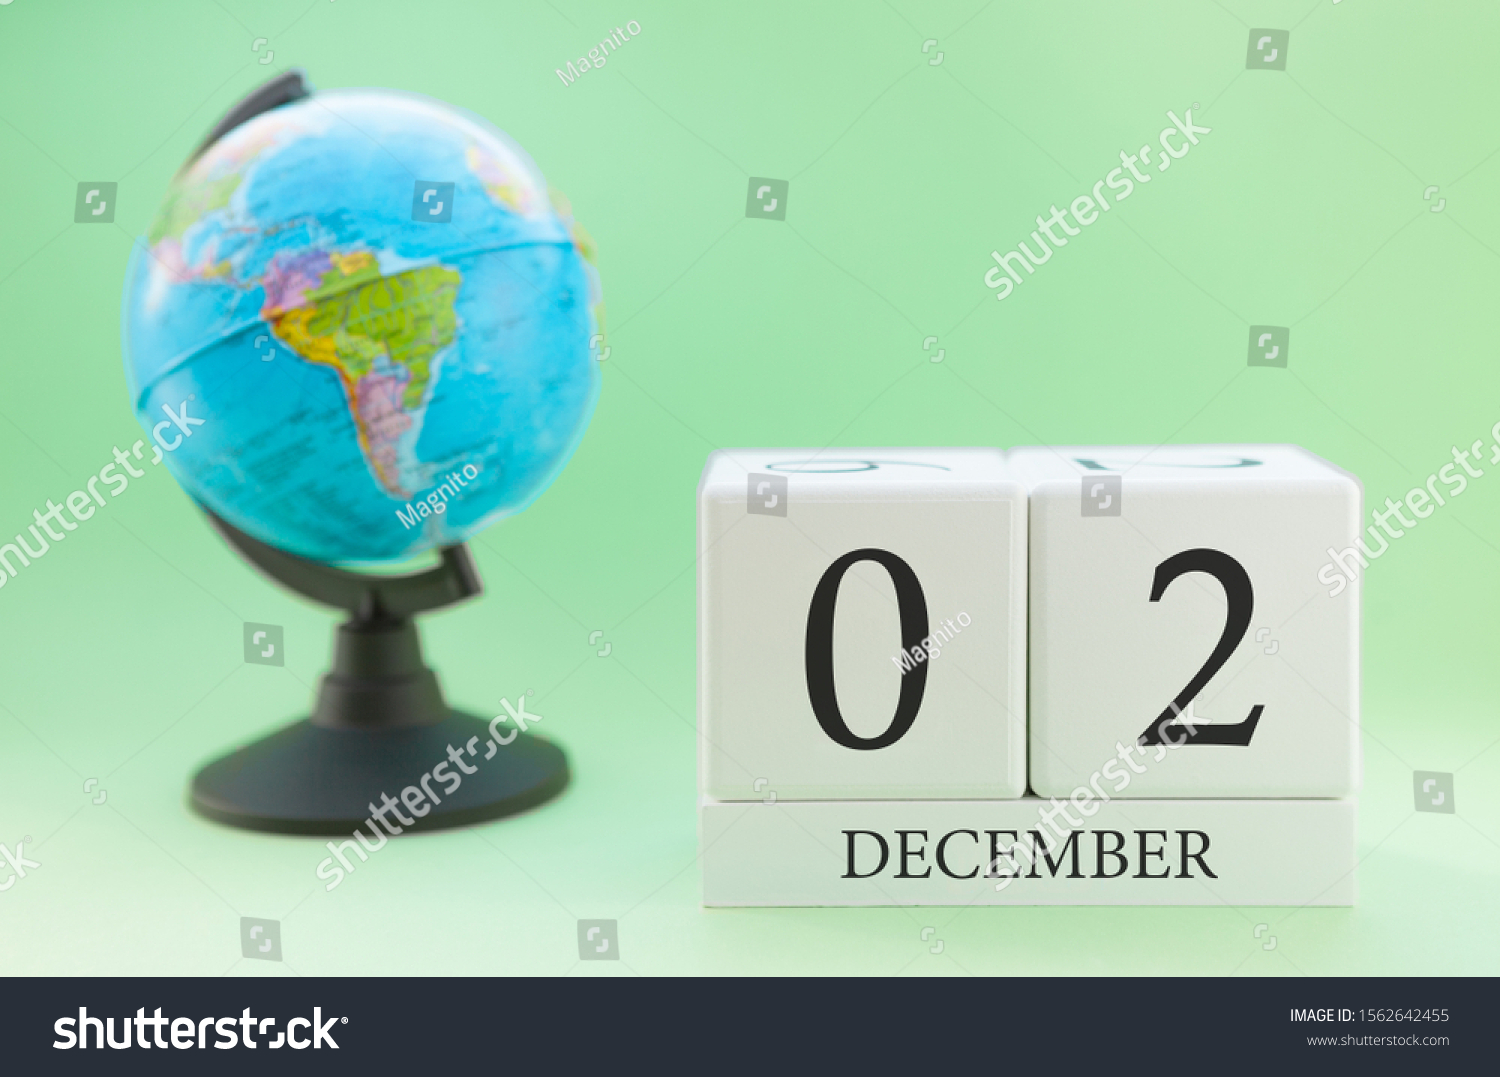 December 2. December month. White cube with numbers and globe on a blurred green background. The concept of New Year and Christmas holidays. #1562642455